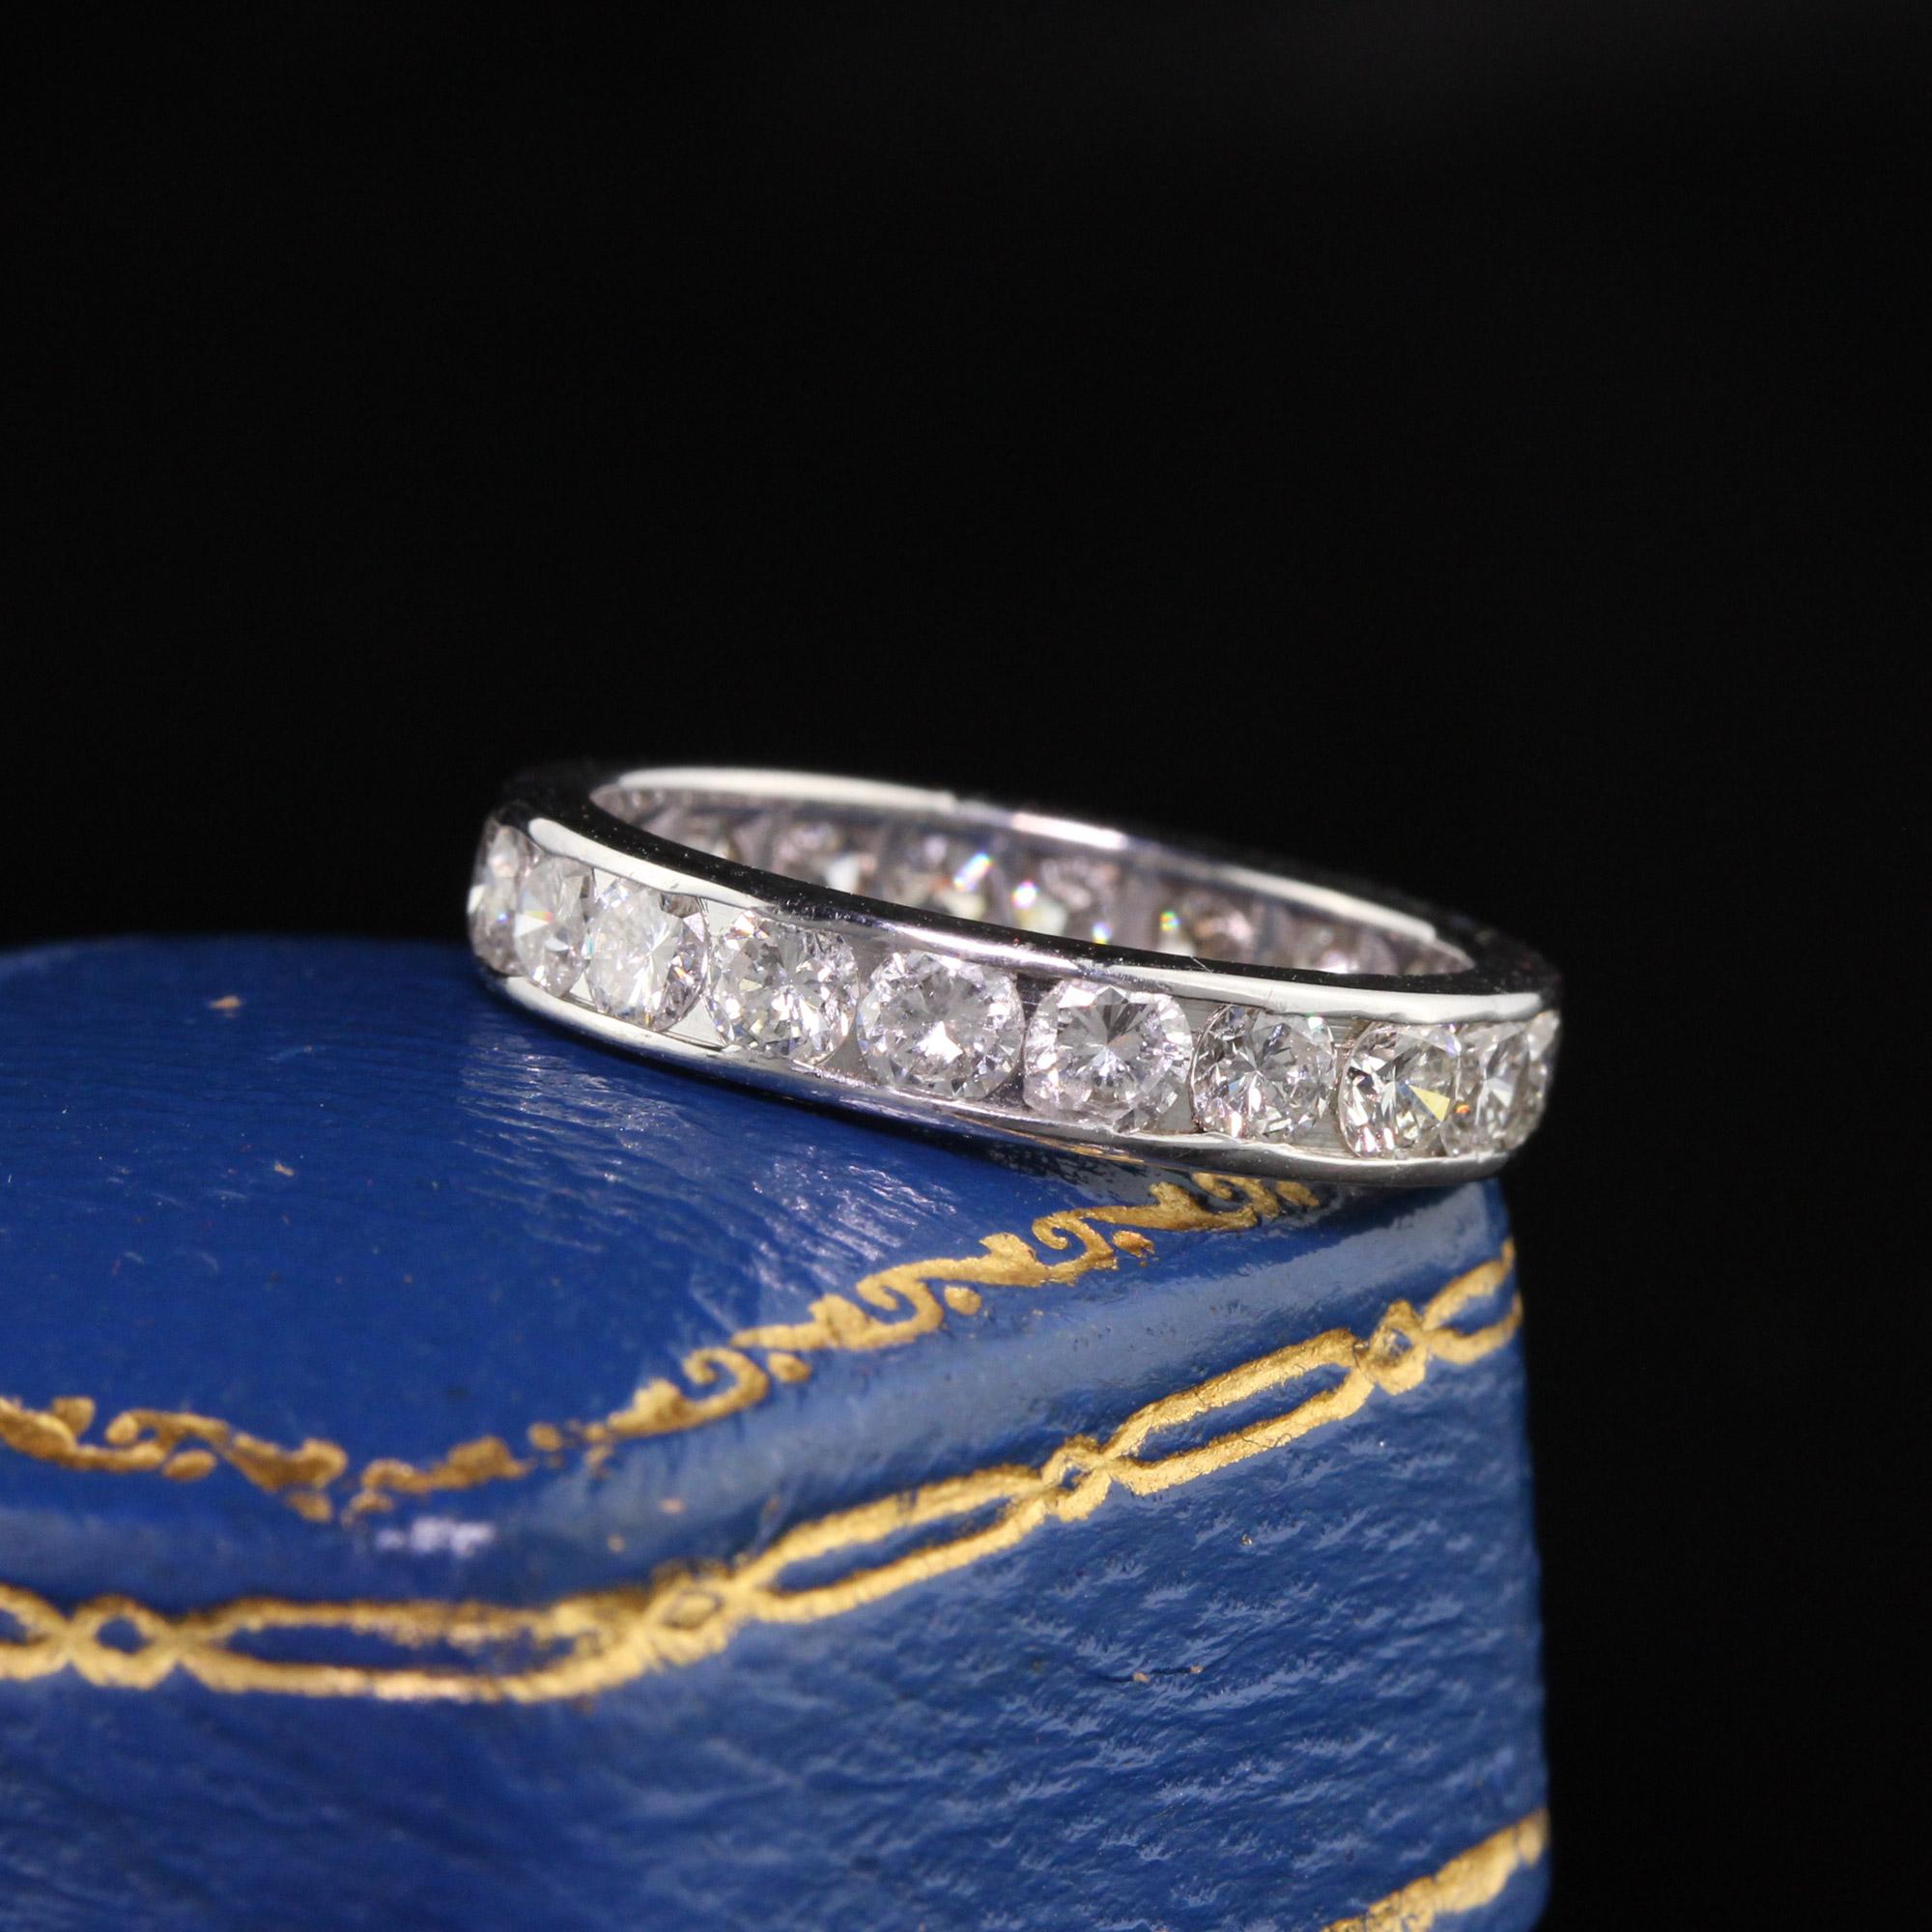 Glamorous diamond eternity band

Metal: White Gold

Weight: 2.5 Grams

Total Diamond Weight: Approximately 1.75 cts

Diamond Color: G

Diamond Clarity: VS2

Ring Size: 4.75

Measurements: 3.5 x 2.1 mm
